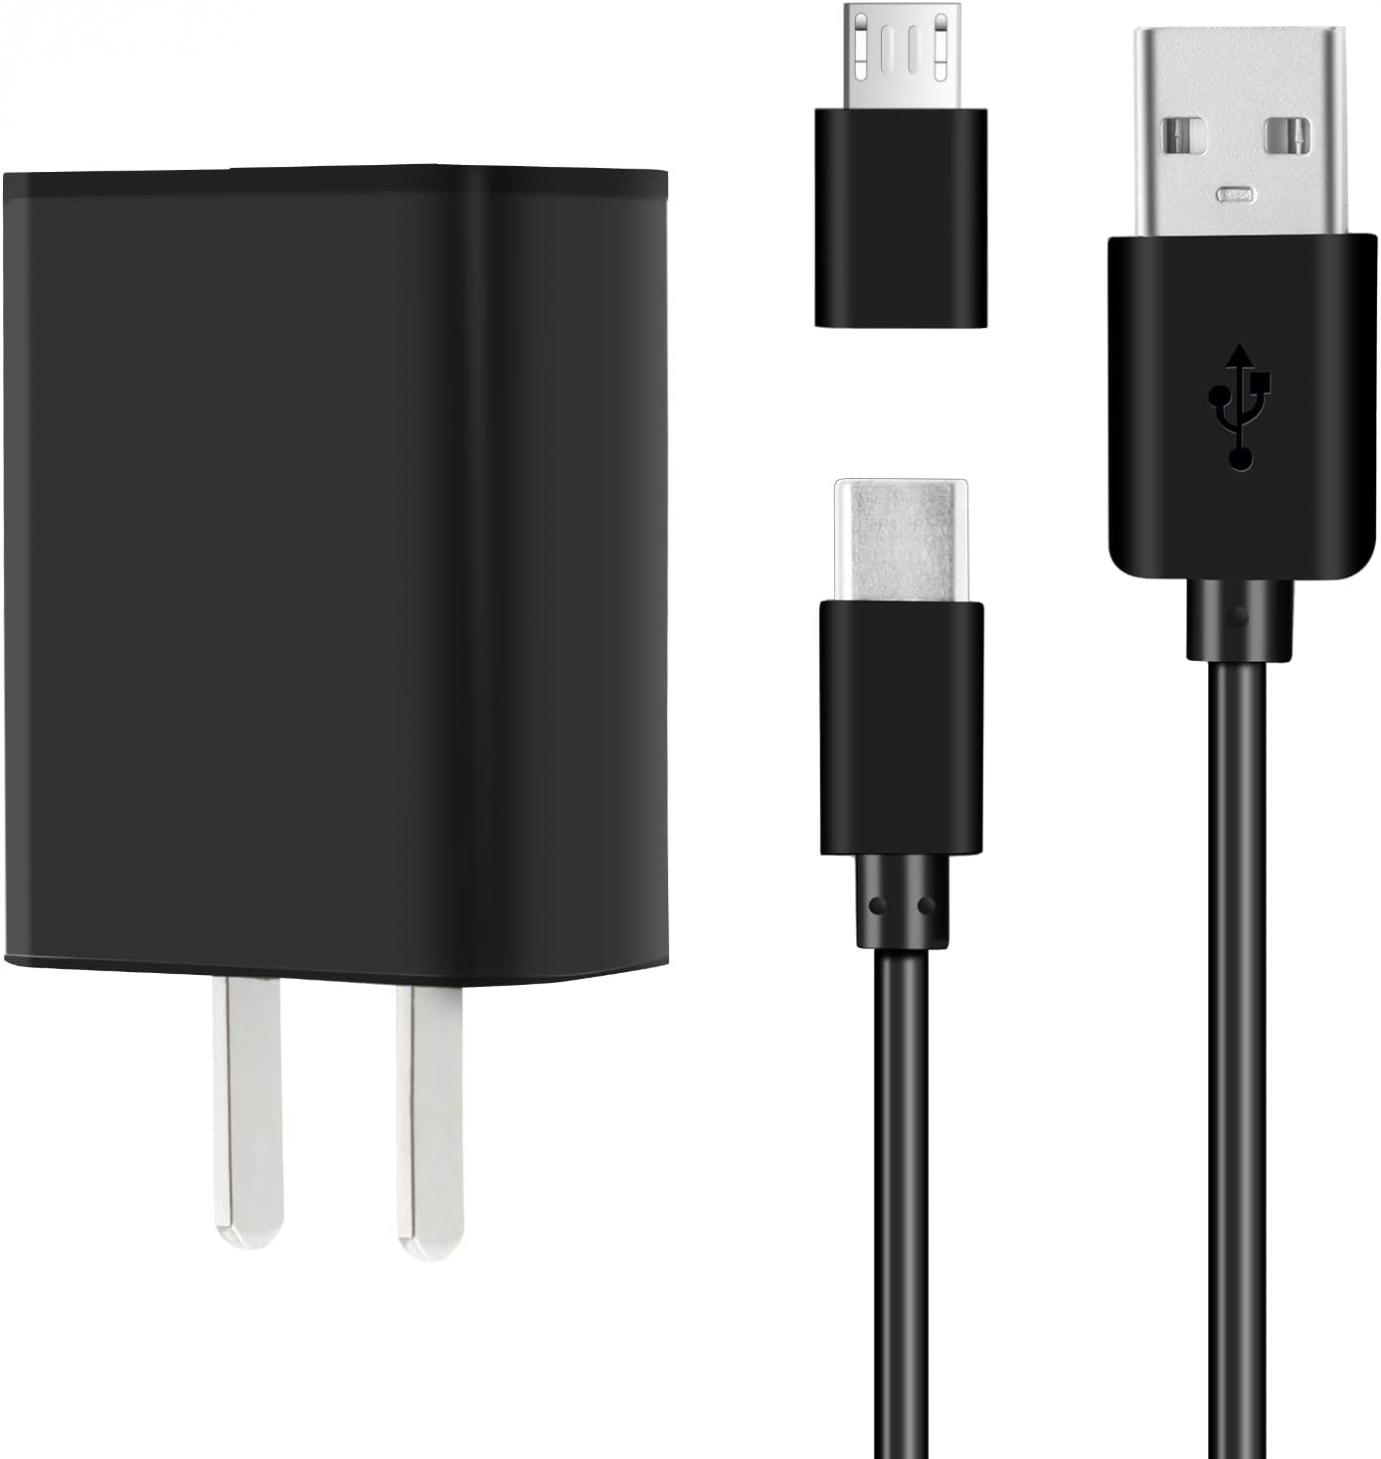 Kindle Fire Fast Charger 2A Rapid Charging Cable for Kindle Fire 7 HD 8 10 Tablet, Google Pixel 6, Amazon Fire HD 8 10 Plus,Kids Edition,Kindle Fire HD HDX 7” 8.9”, Samsung